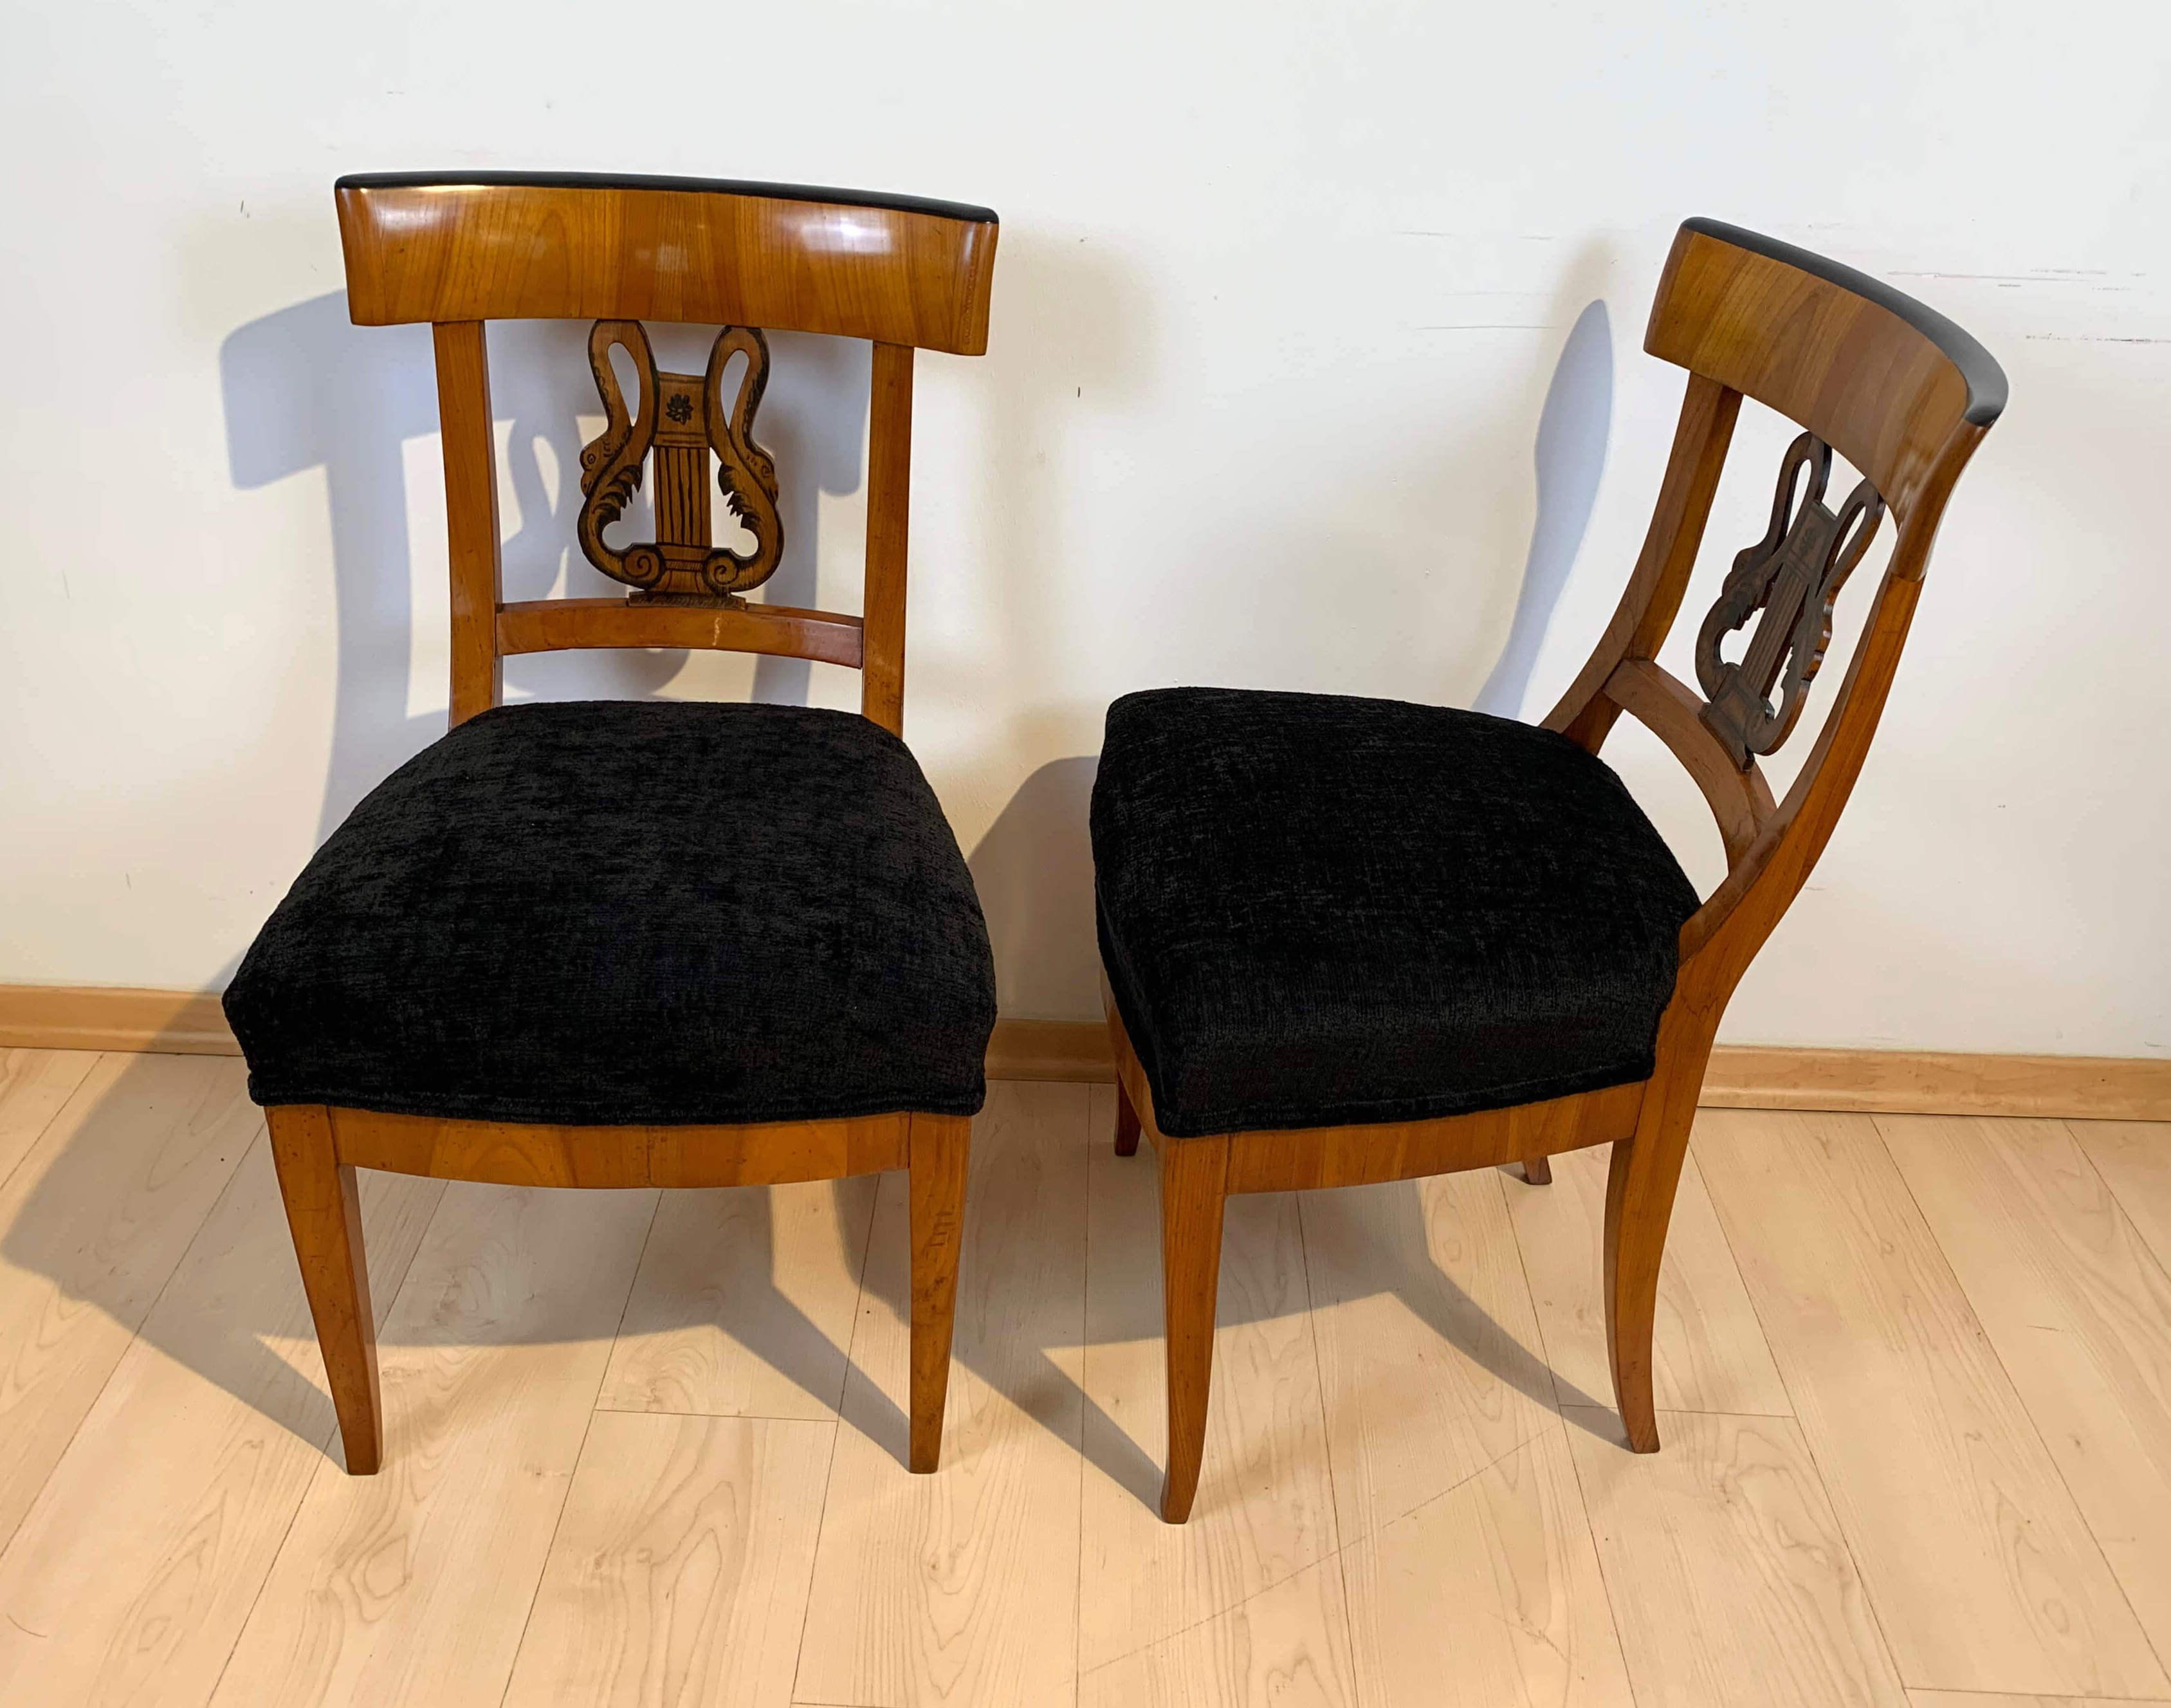 Rare Pair of early neoclassical Biedermeier chairs with amazing painted back decor.

Cherry veneer and solid wood. Refinished with shellac french polish. Very elegant design and back decoration in lyre and swan form with painting and old